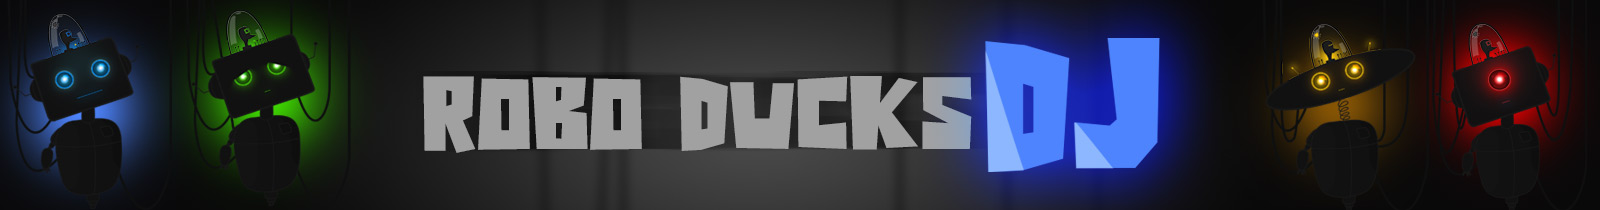 Profile banner of collection RoboDuckDJ